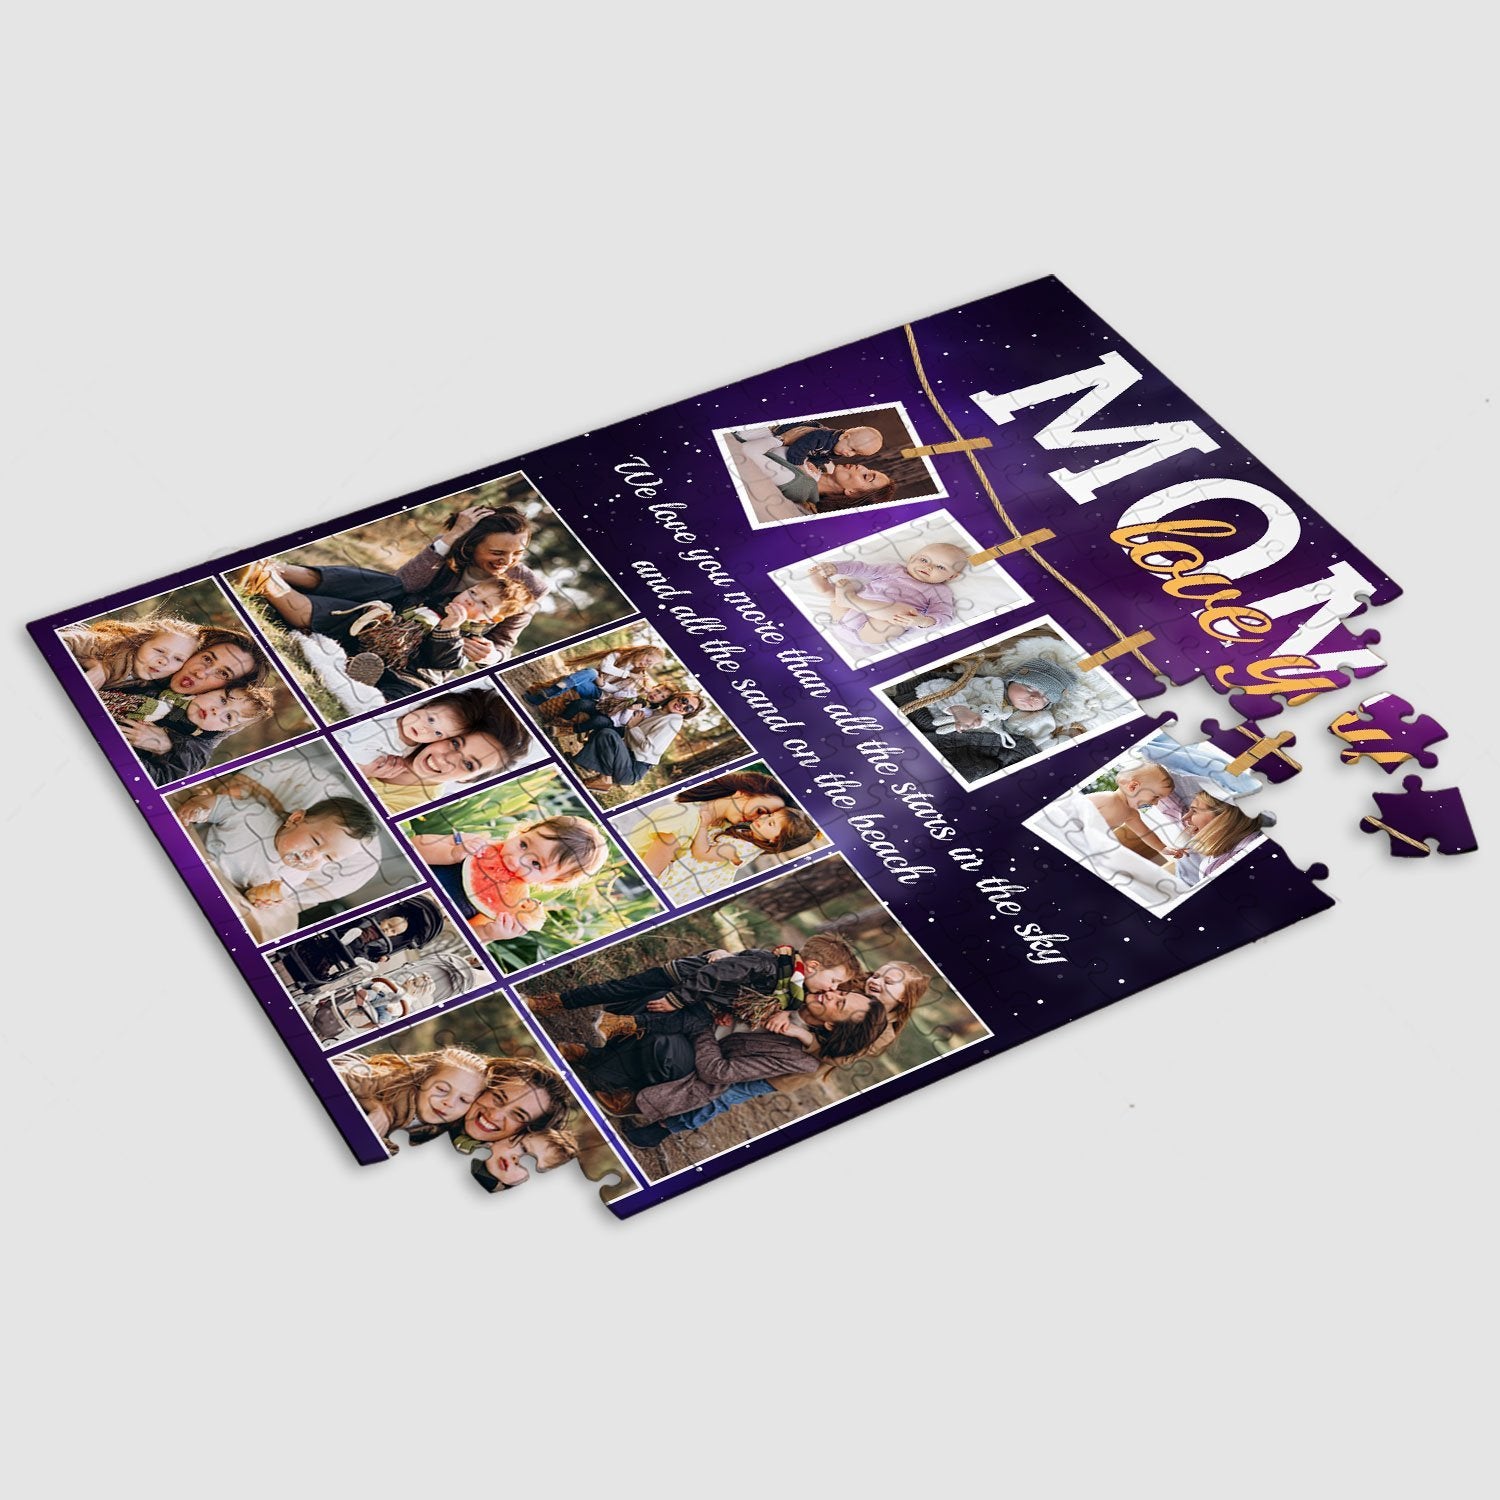 Mom, Love You, Custom Photo, Personalized Text Jigsaw Puzzles